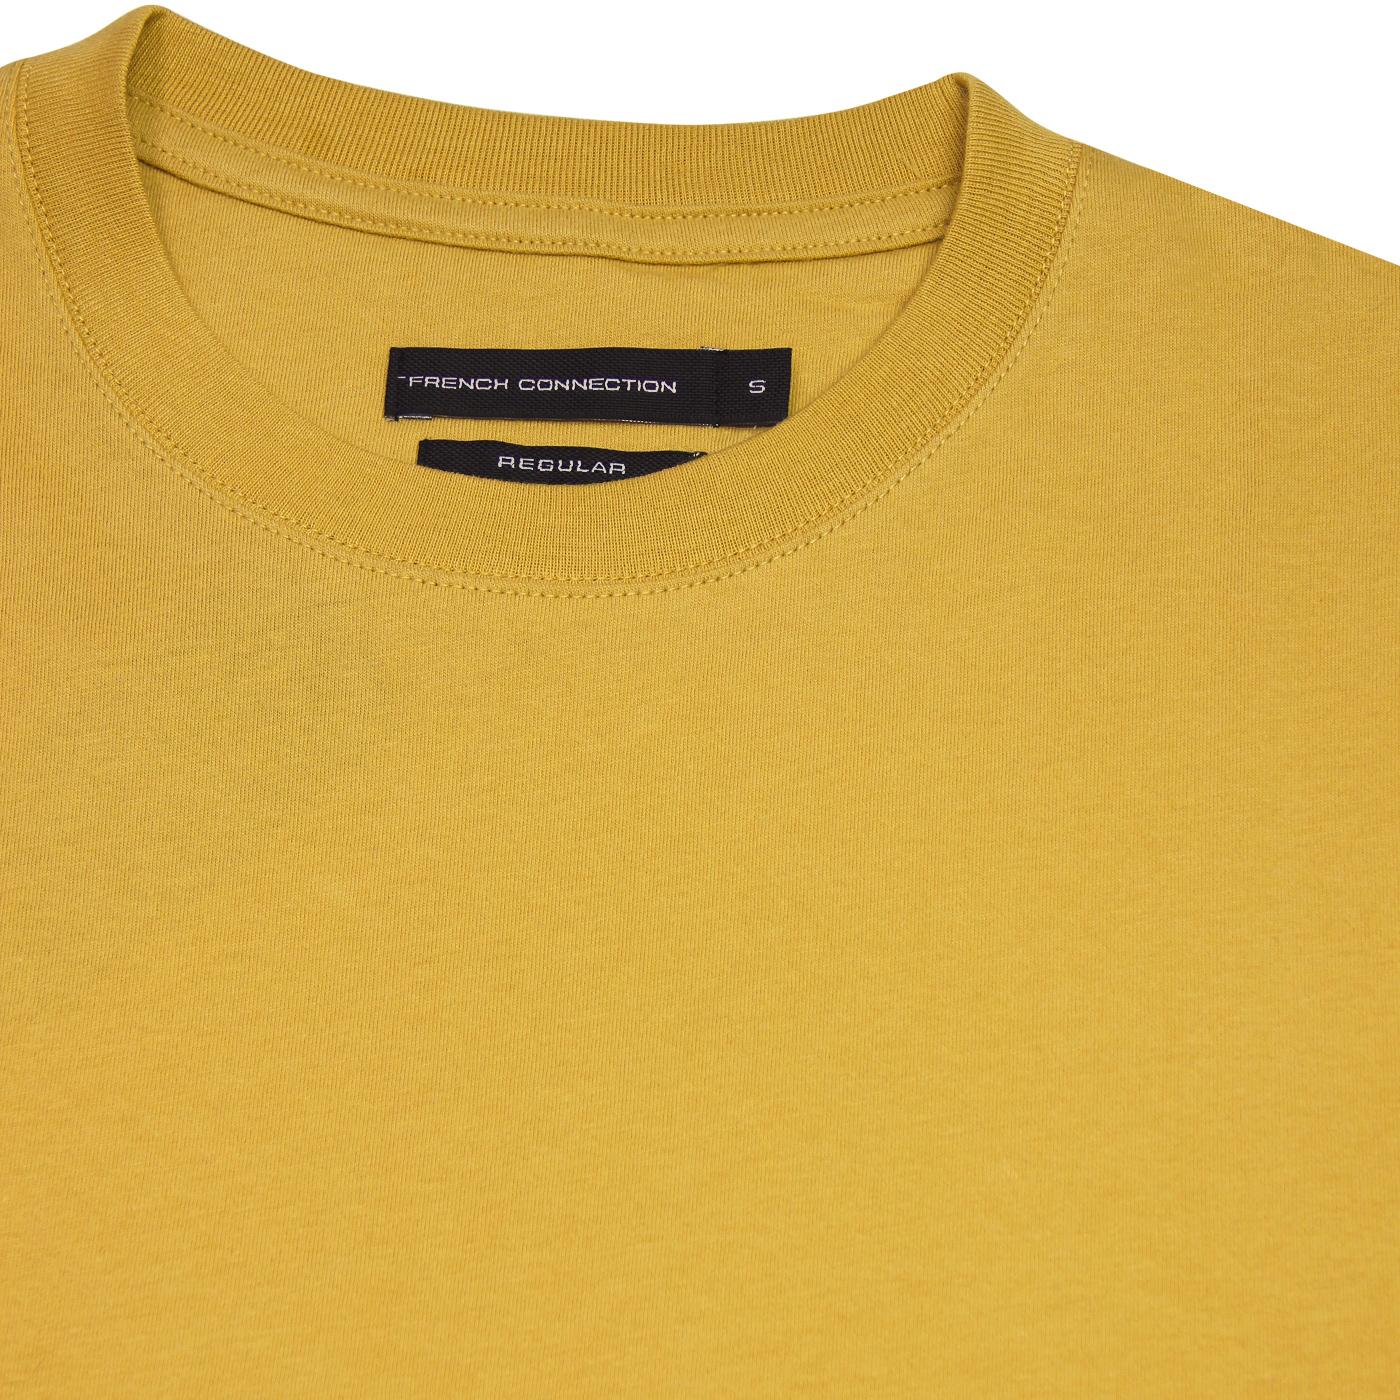 FRENCH CONNECTION Retro Classic Crew Tee in Fall Leaf